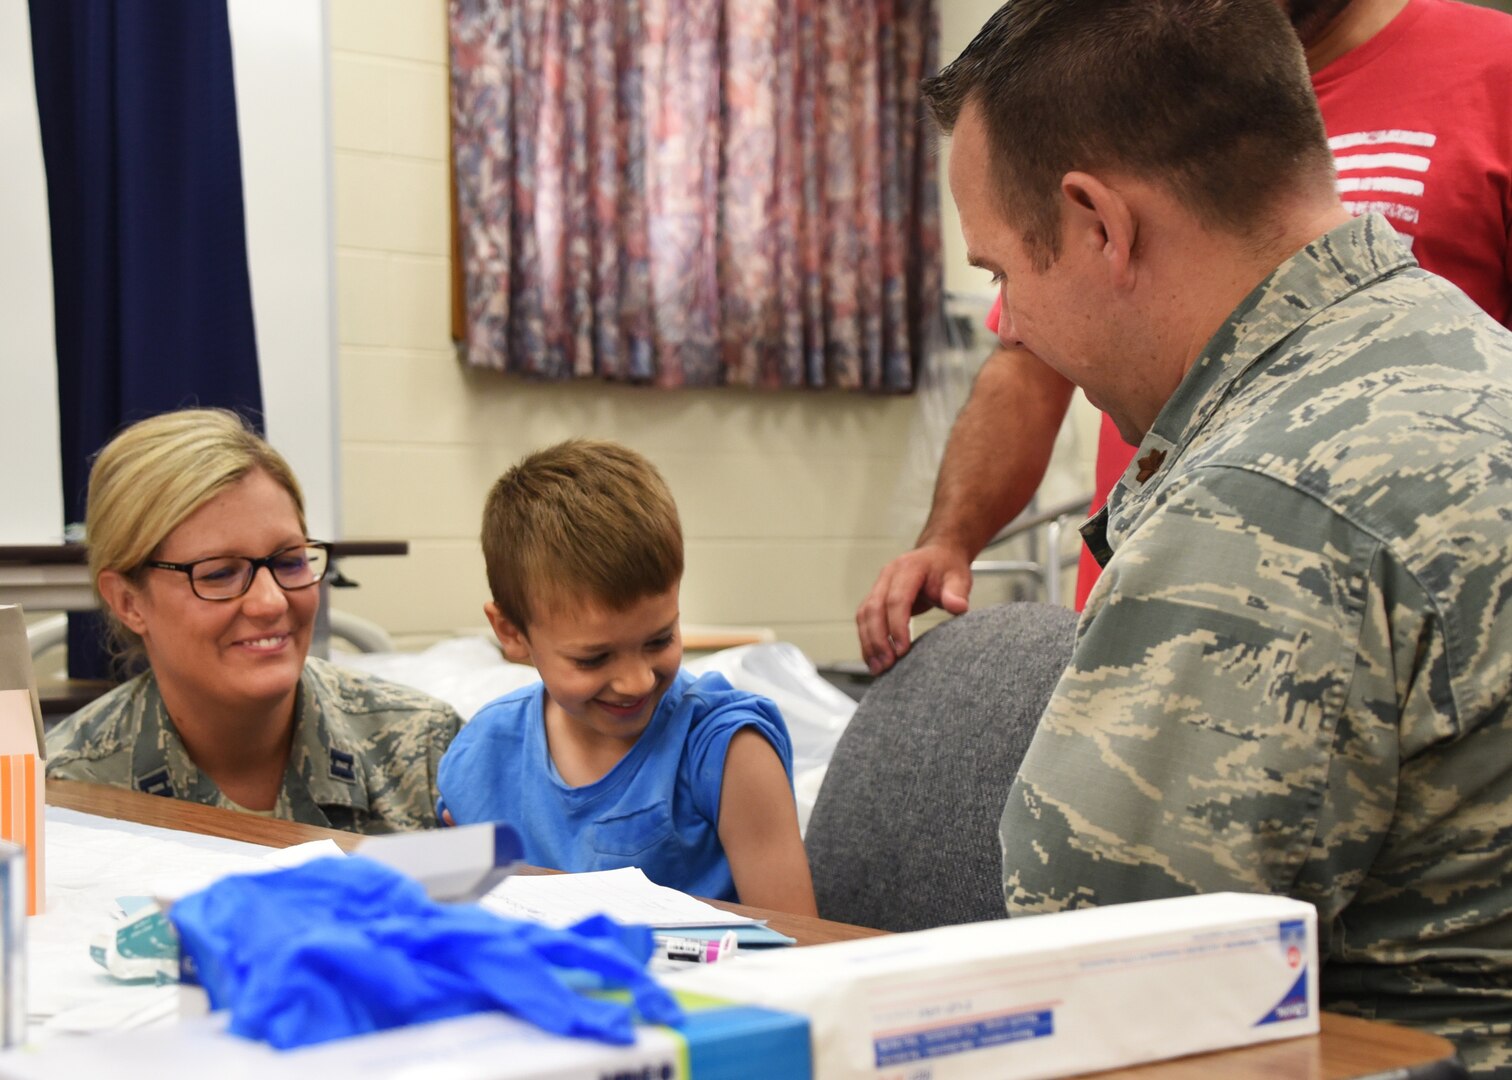 Airmen from the 179th Airlift Wing Medical Group, Mansfield, Ohio, give a child immunization shots as part of GuardCare Weekend Aug. 10, 2019, at the Buckeye Career Center, New Philadelphia, Ohio. GuardCare offers the opportunity for community members to receive basic healthcare and advice on further medical recommendations.